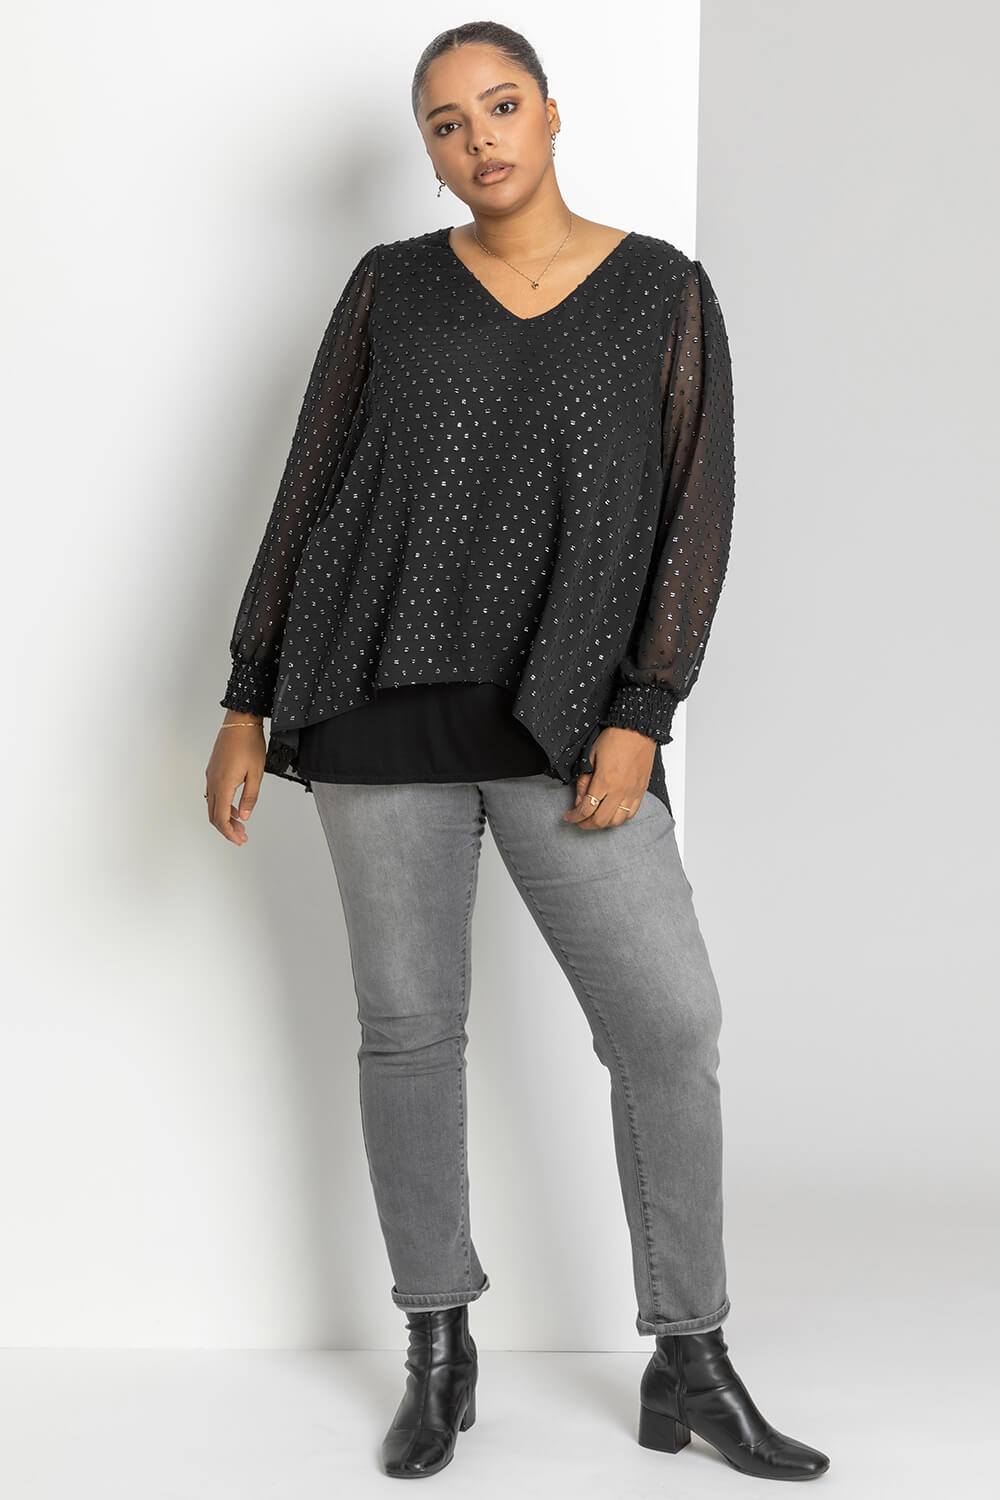 Silver Curve Metallic Textured Spot Blouse, Image 3 of 4